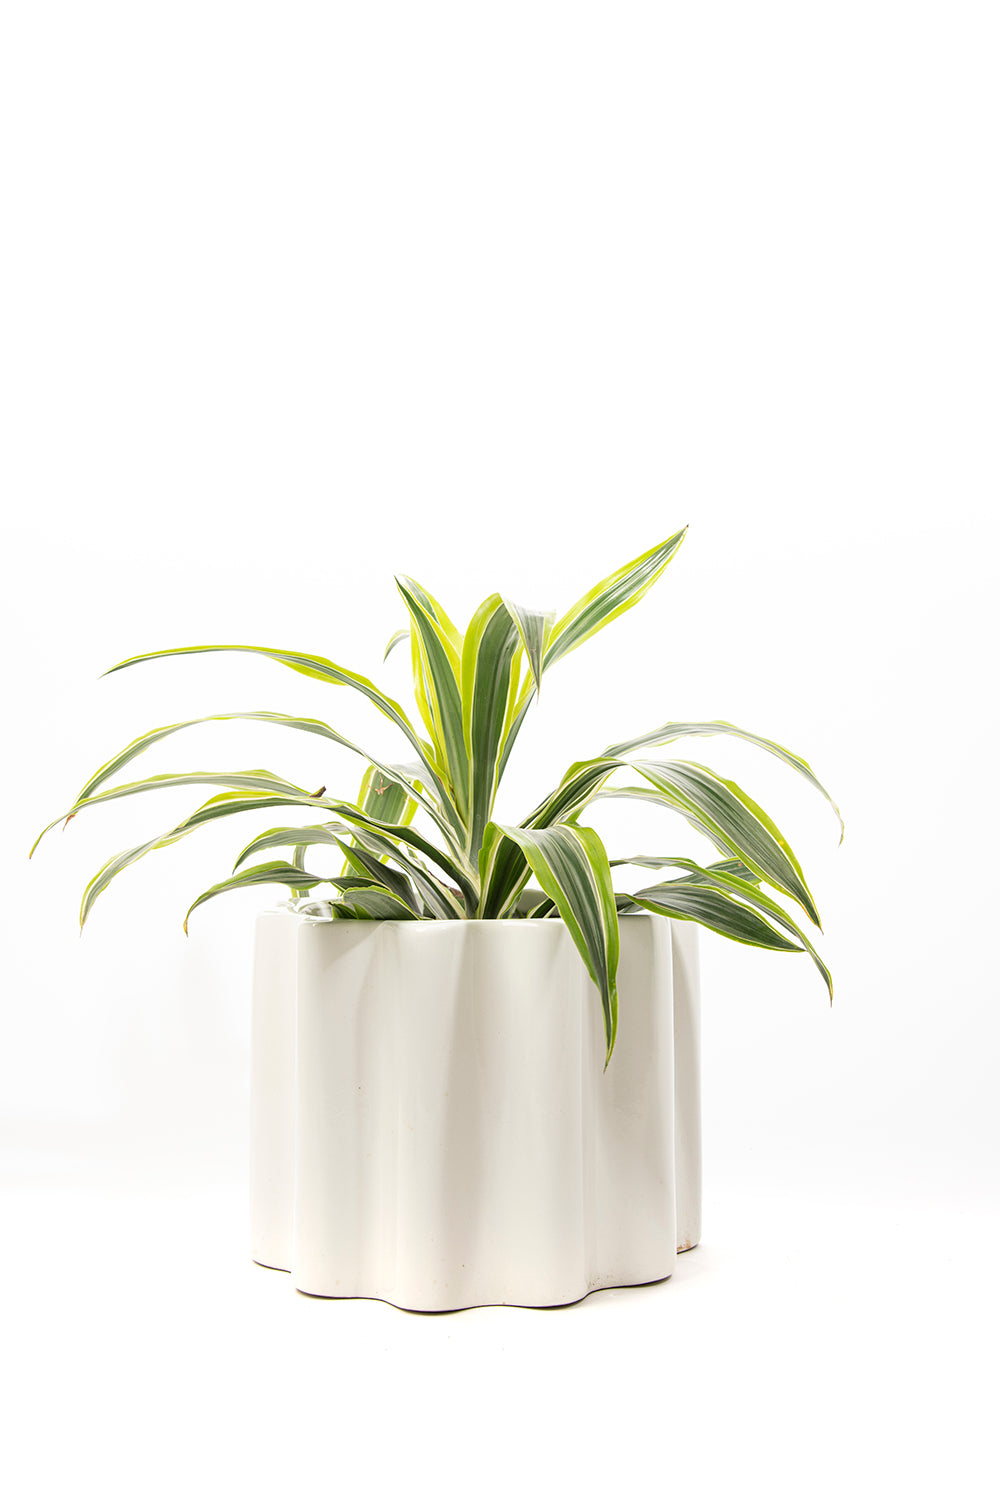 Medium Size Balmy Waves Ceramic Planter in White color with Dracaena Fragrans plant in it.